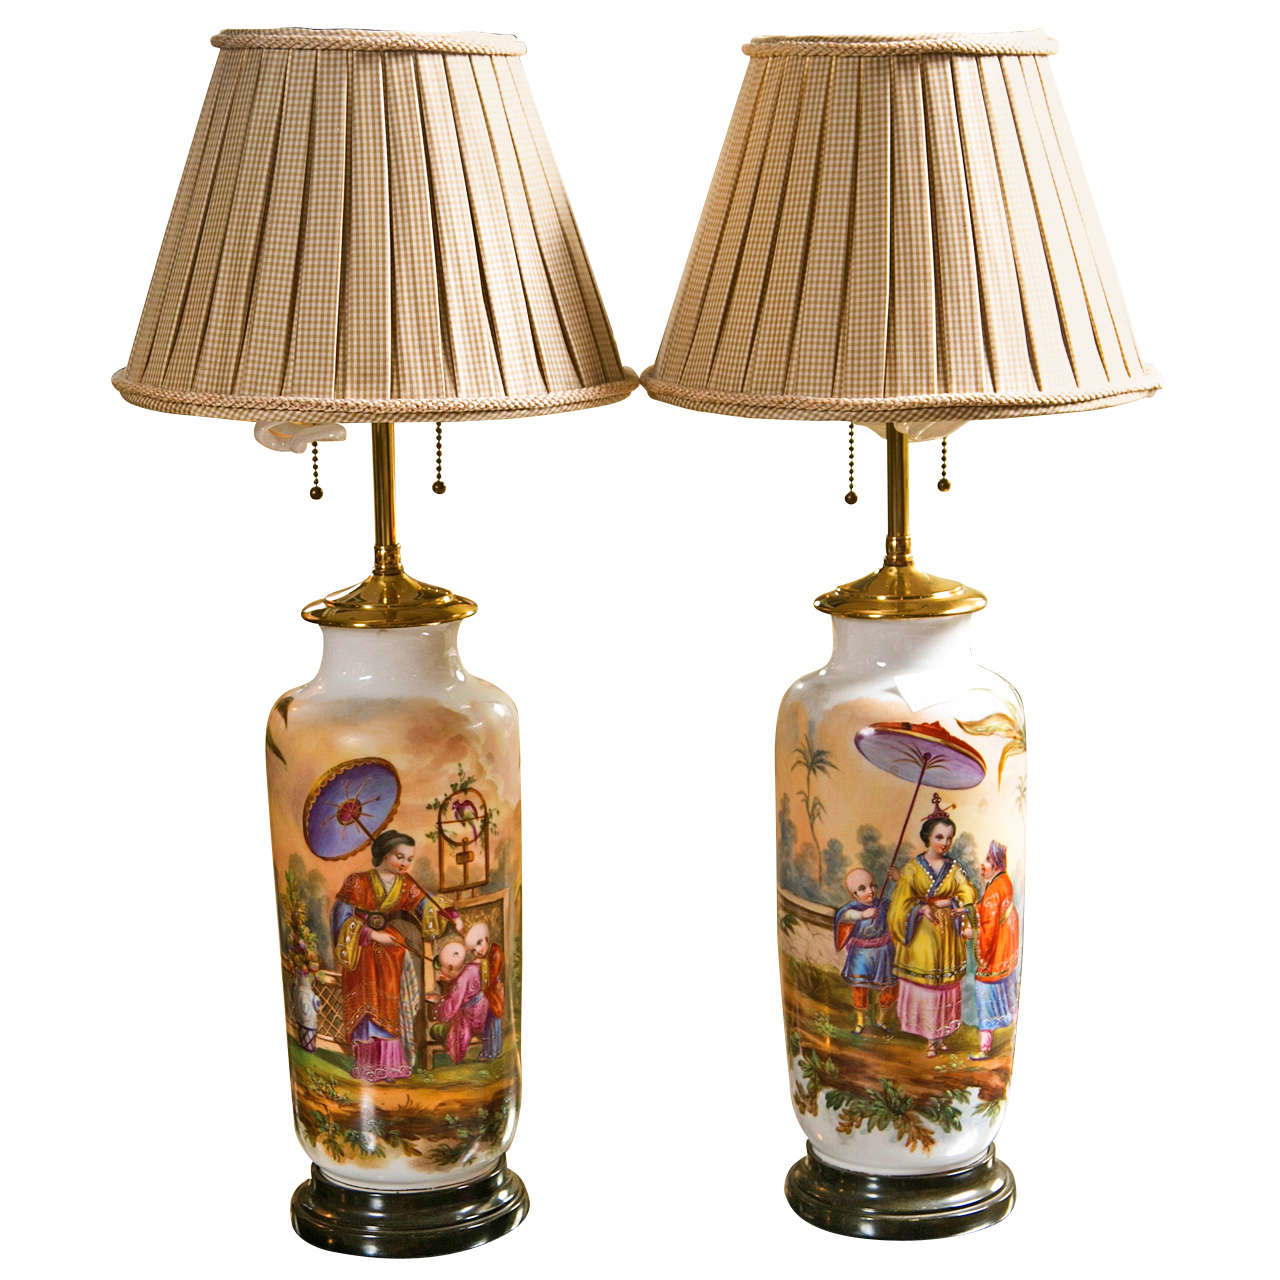 Pair of 19th Century French Chinoiserie Style Porcelain Lamps